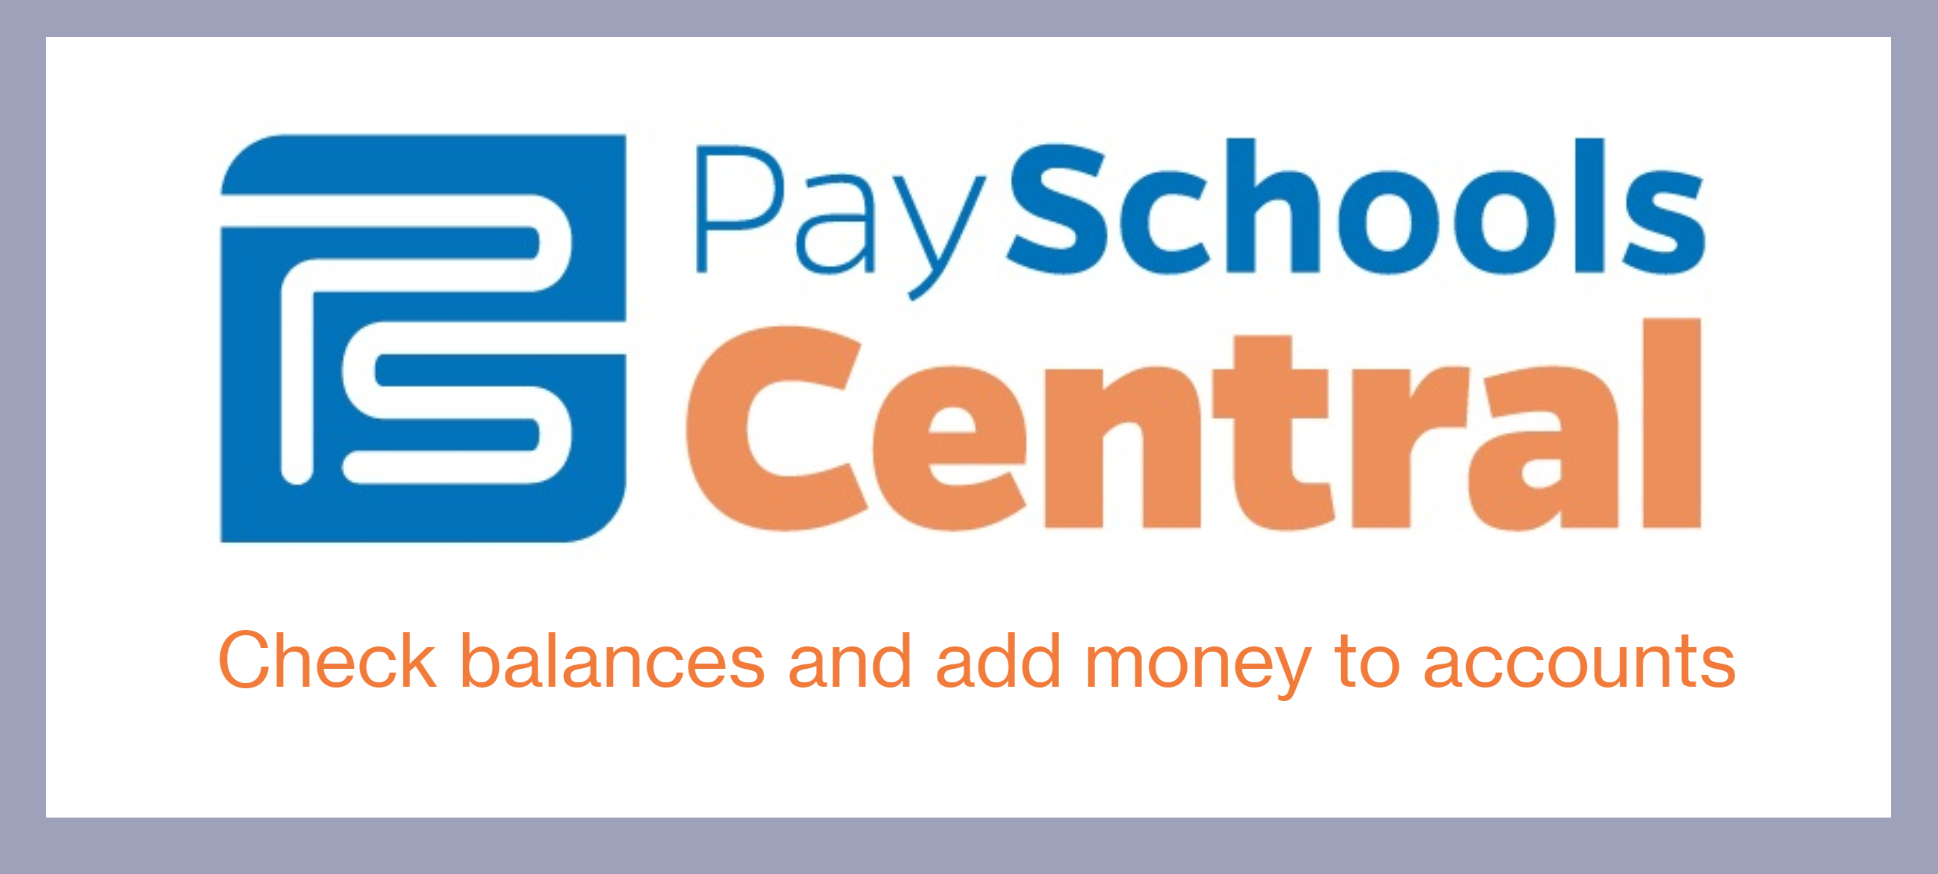 PaySchools Central